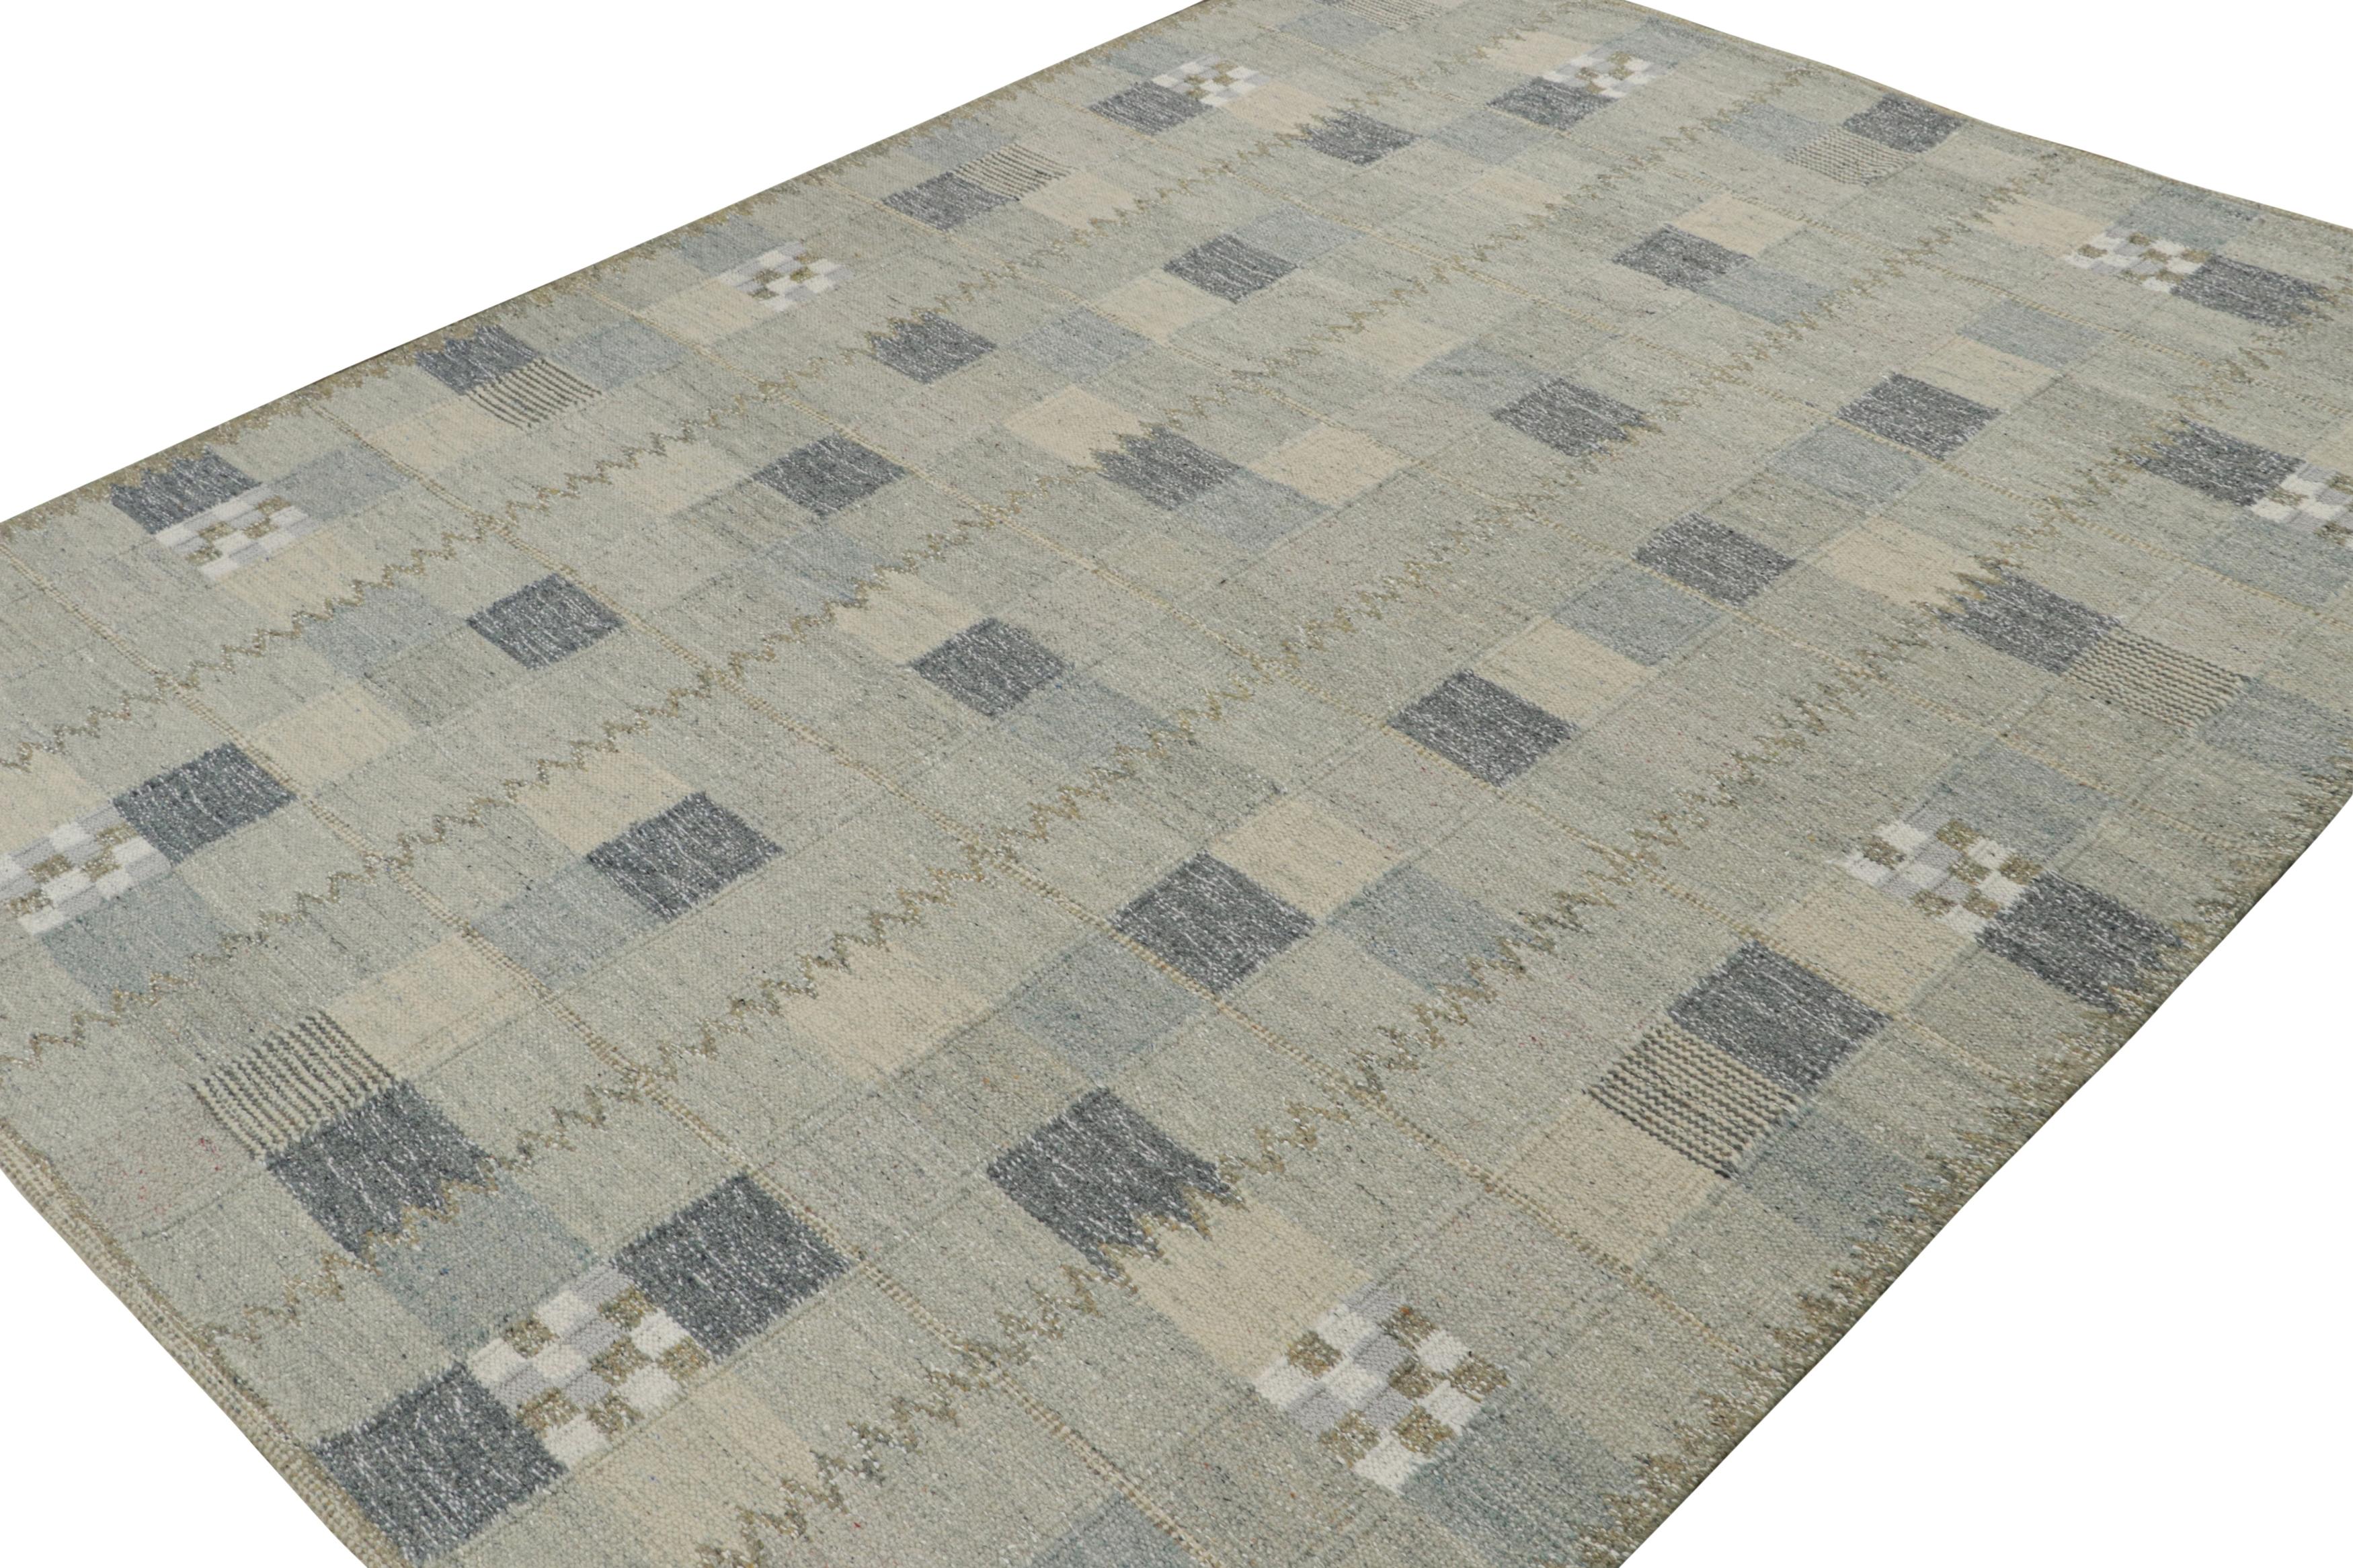 An elegant 9x12 Swedish style kilim from our award-winning Scandinavian flat weave collection. Handwoven in wool & undyed natural yarns.

On the Design: 

This rug enjoys a play of tones of blue with gray for a very cool, coastal vibe in our